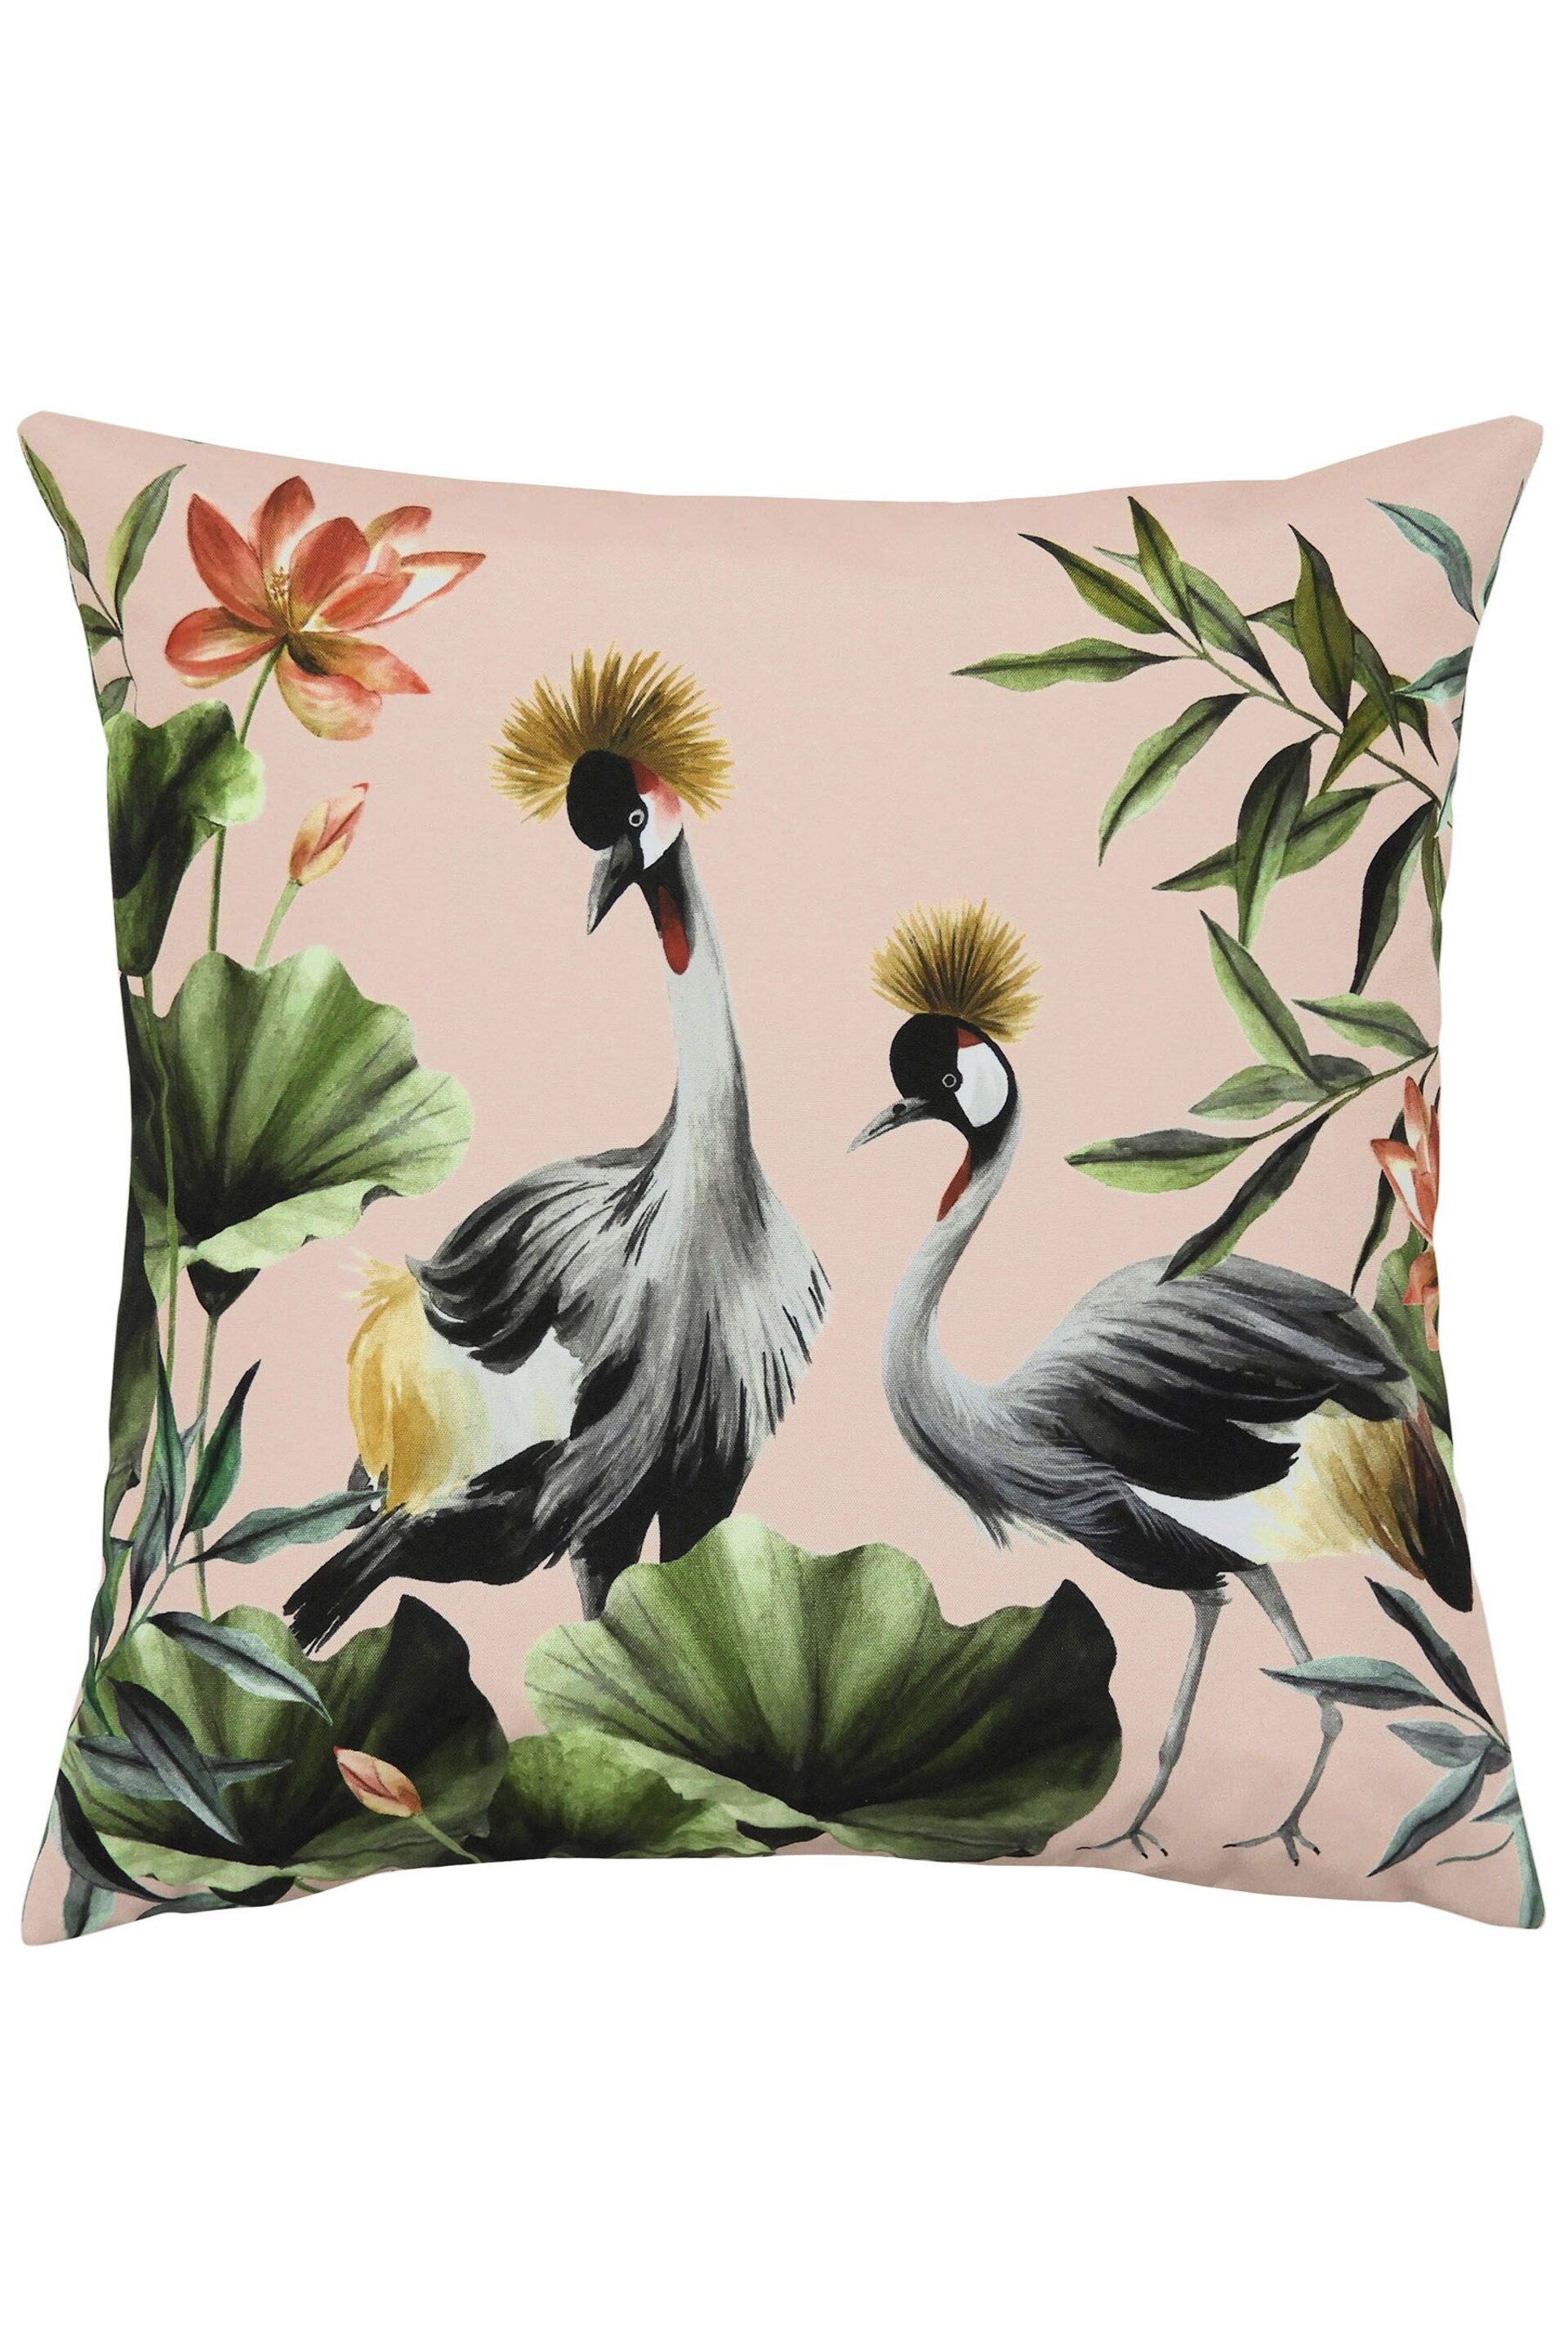 Evans Lichfield Blush Pink/Forest Green Cranes Outdoor Polyester Filled Cushion - Image 2 of 5